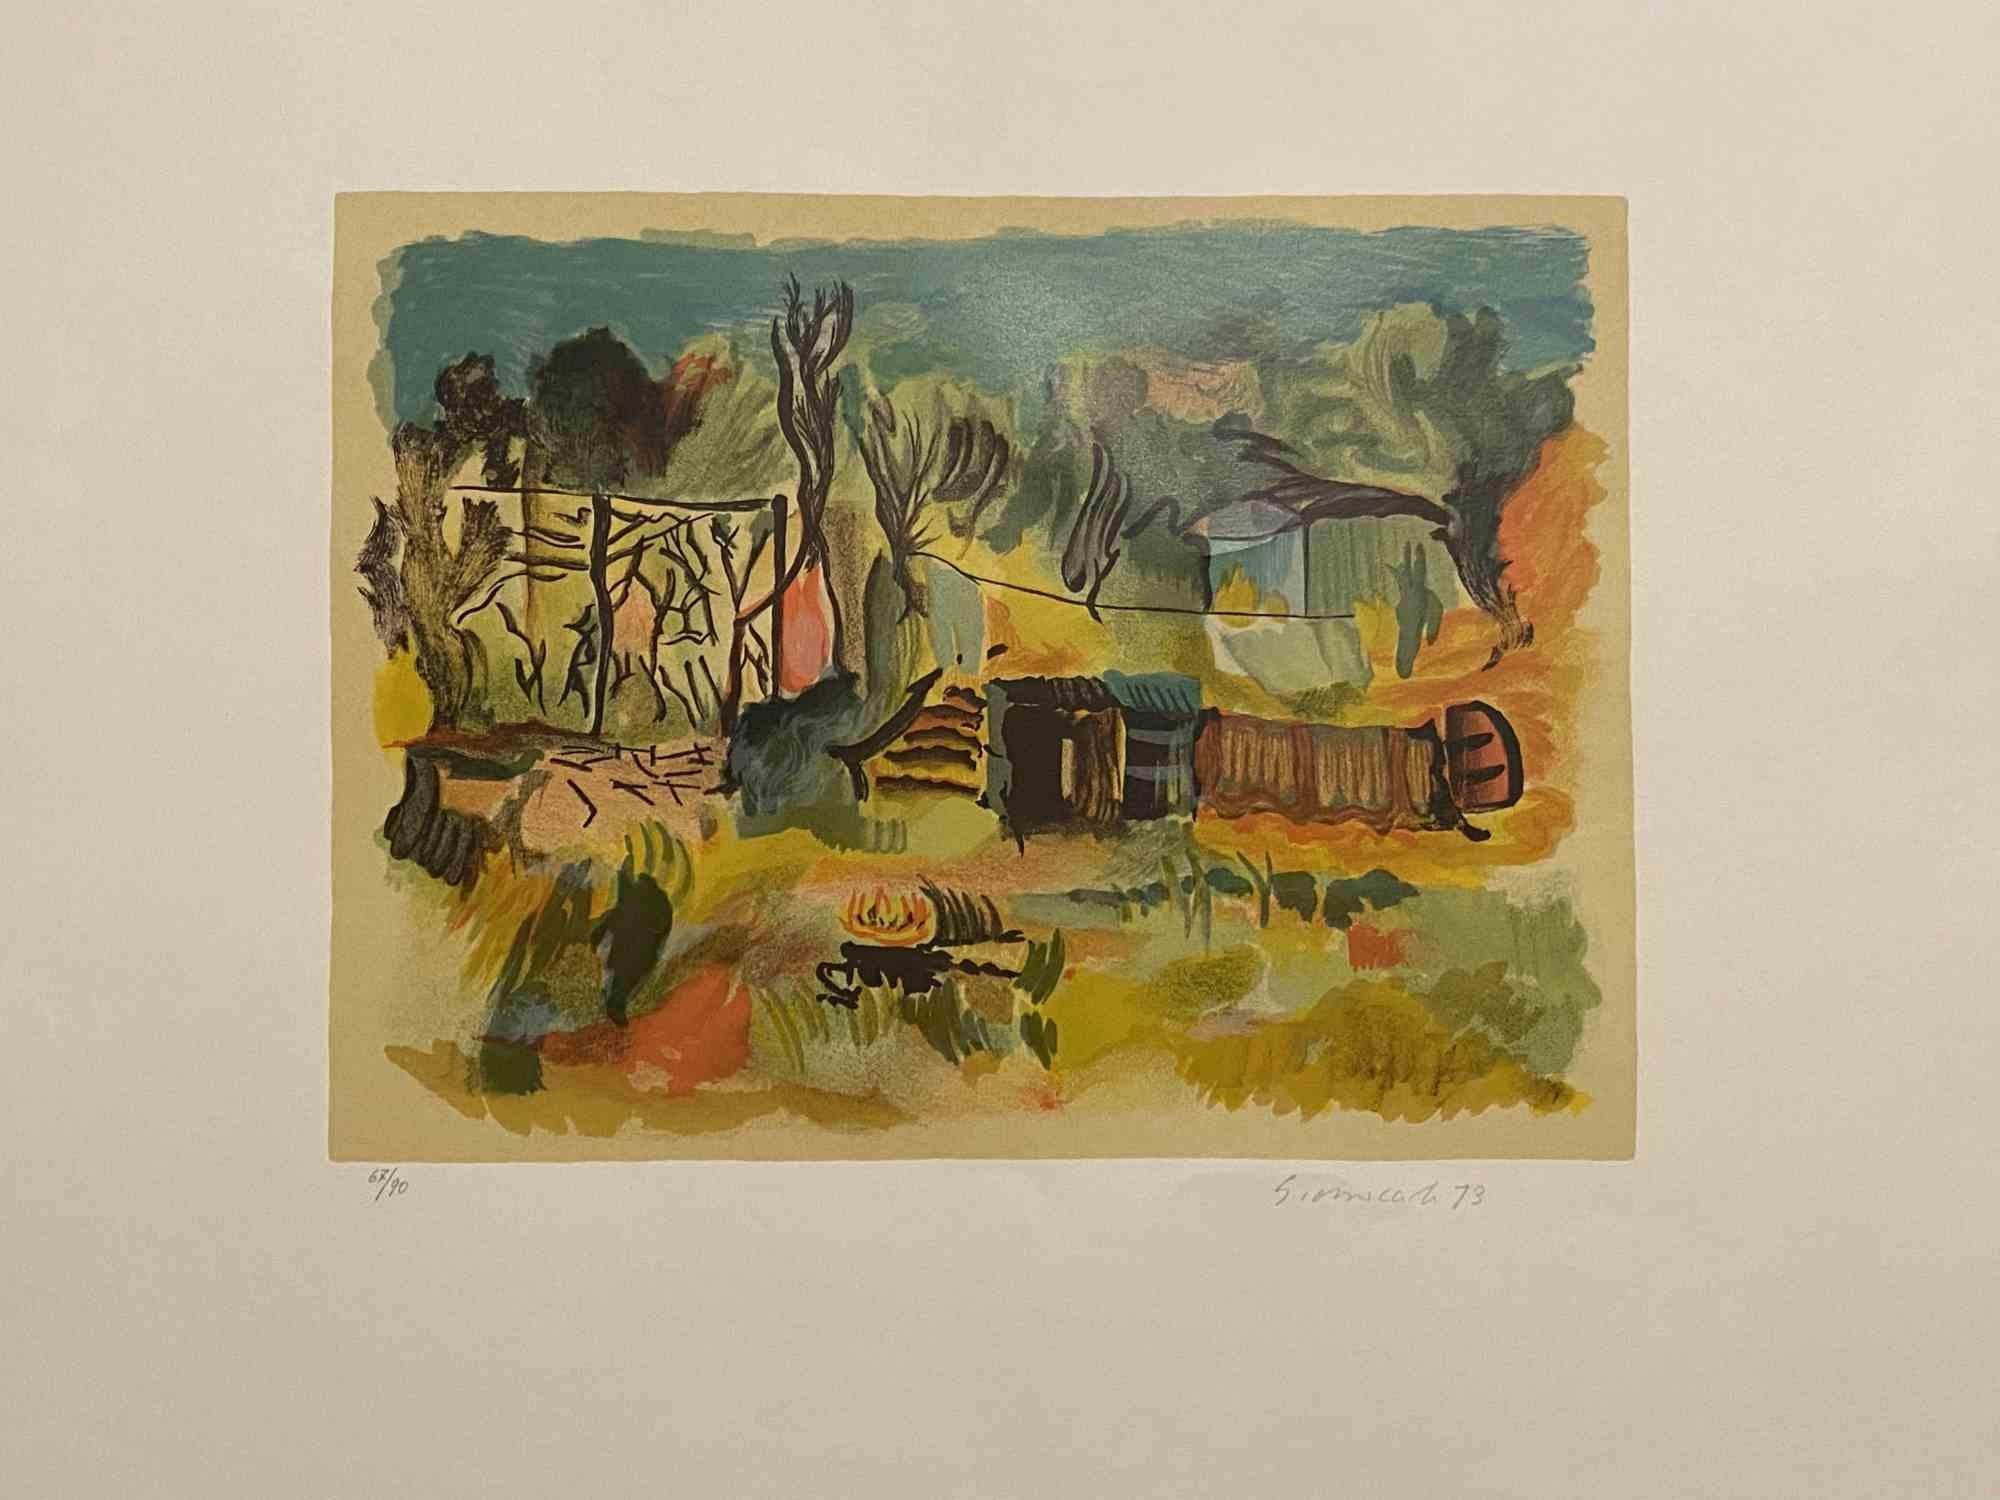 Roman Suburbs is an original artwork realized in 1973 by Giovanni Omiccioli (February 25, 1901 – March 1, 1975).

Original Colored Lithograph on cardboard.

Hand-signed and dated on the lower right corner in pencil by the artist: Omiccioli 1973.